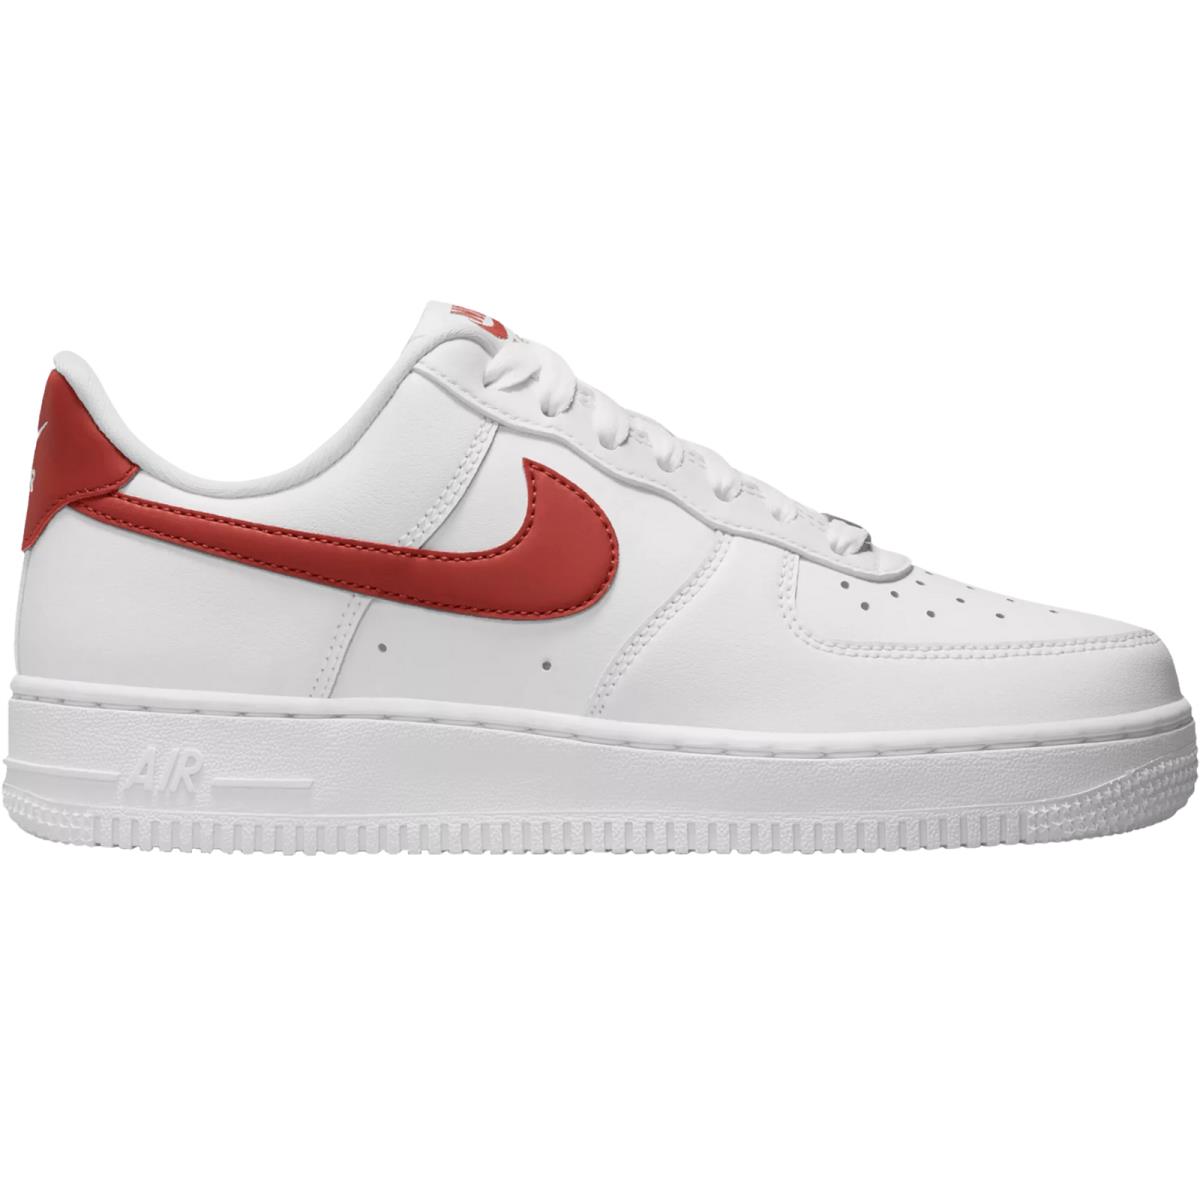 Nike Air Force 1 Women`s Casual Shoes All Colors US Sizes 6-11 White/Rugged Orange